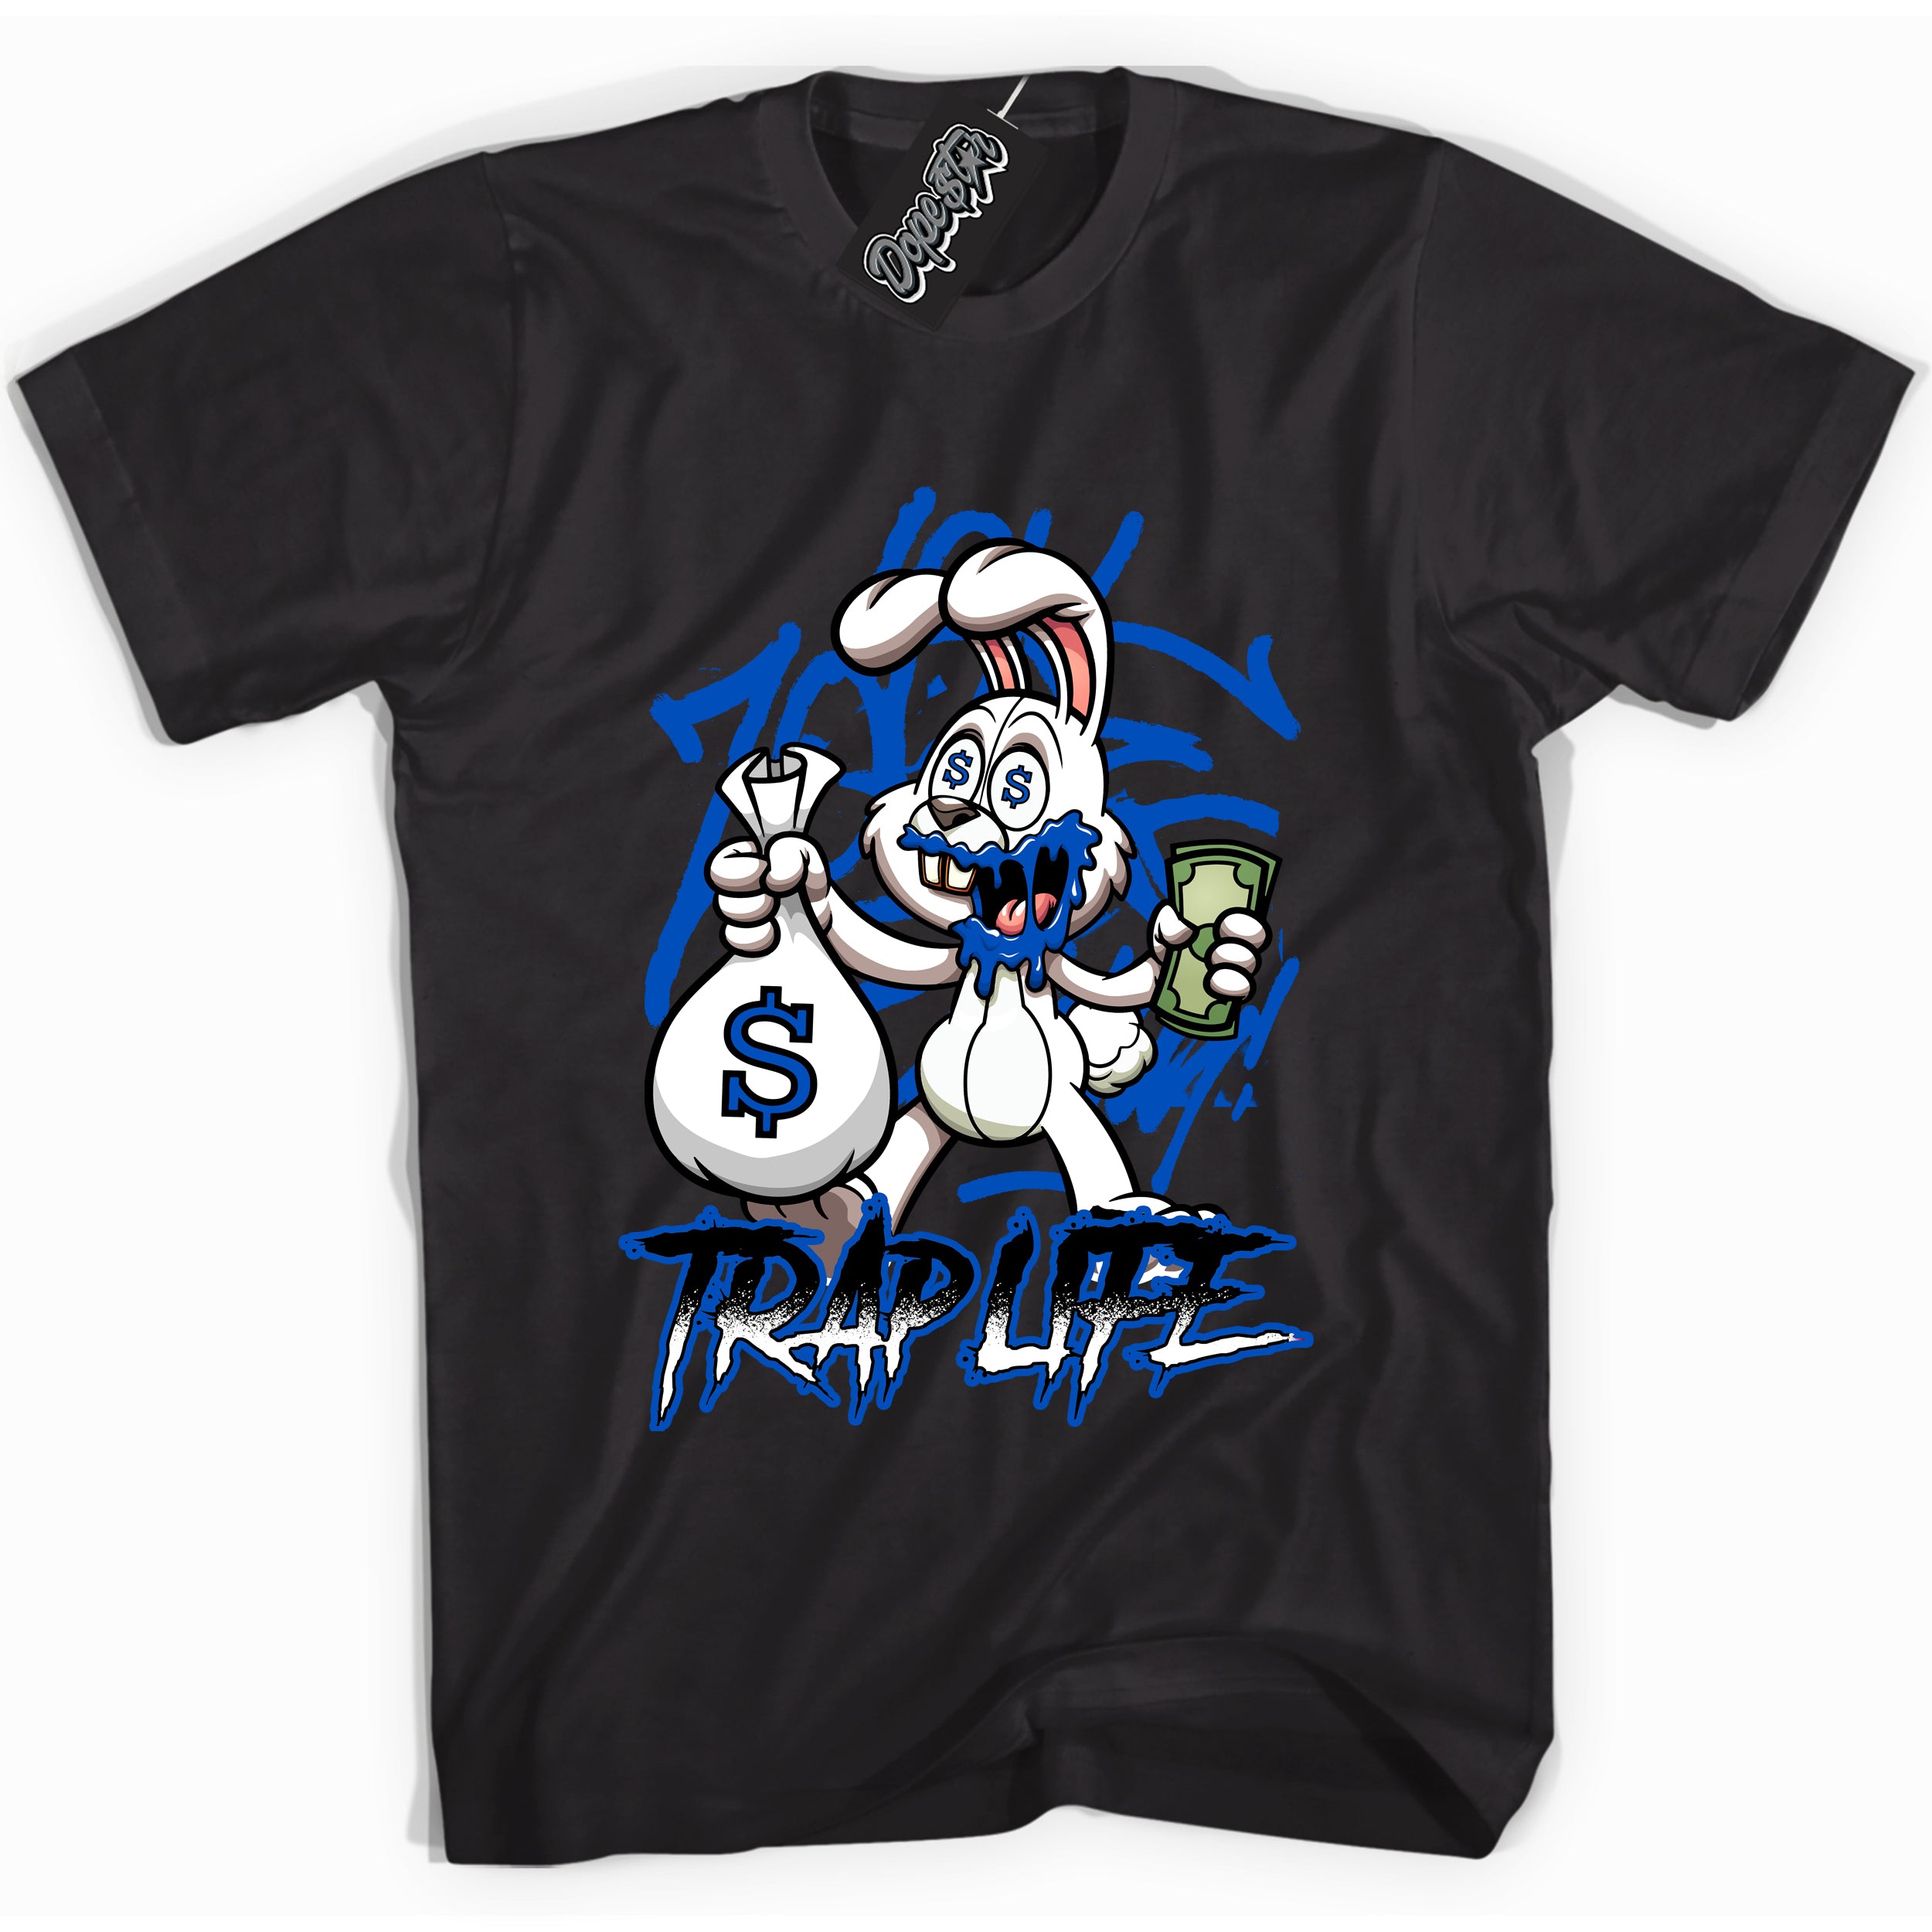 Cool Black graphic tee with "Trap Rabbit" design, that perfectly matches Royal Reimagined 1s sneakers 